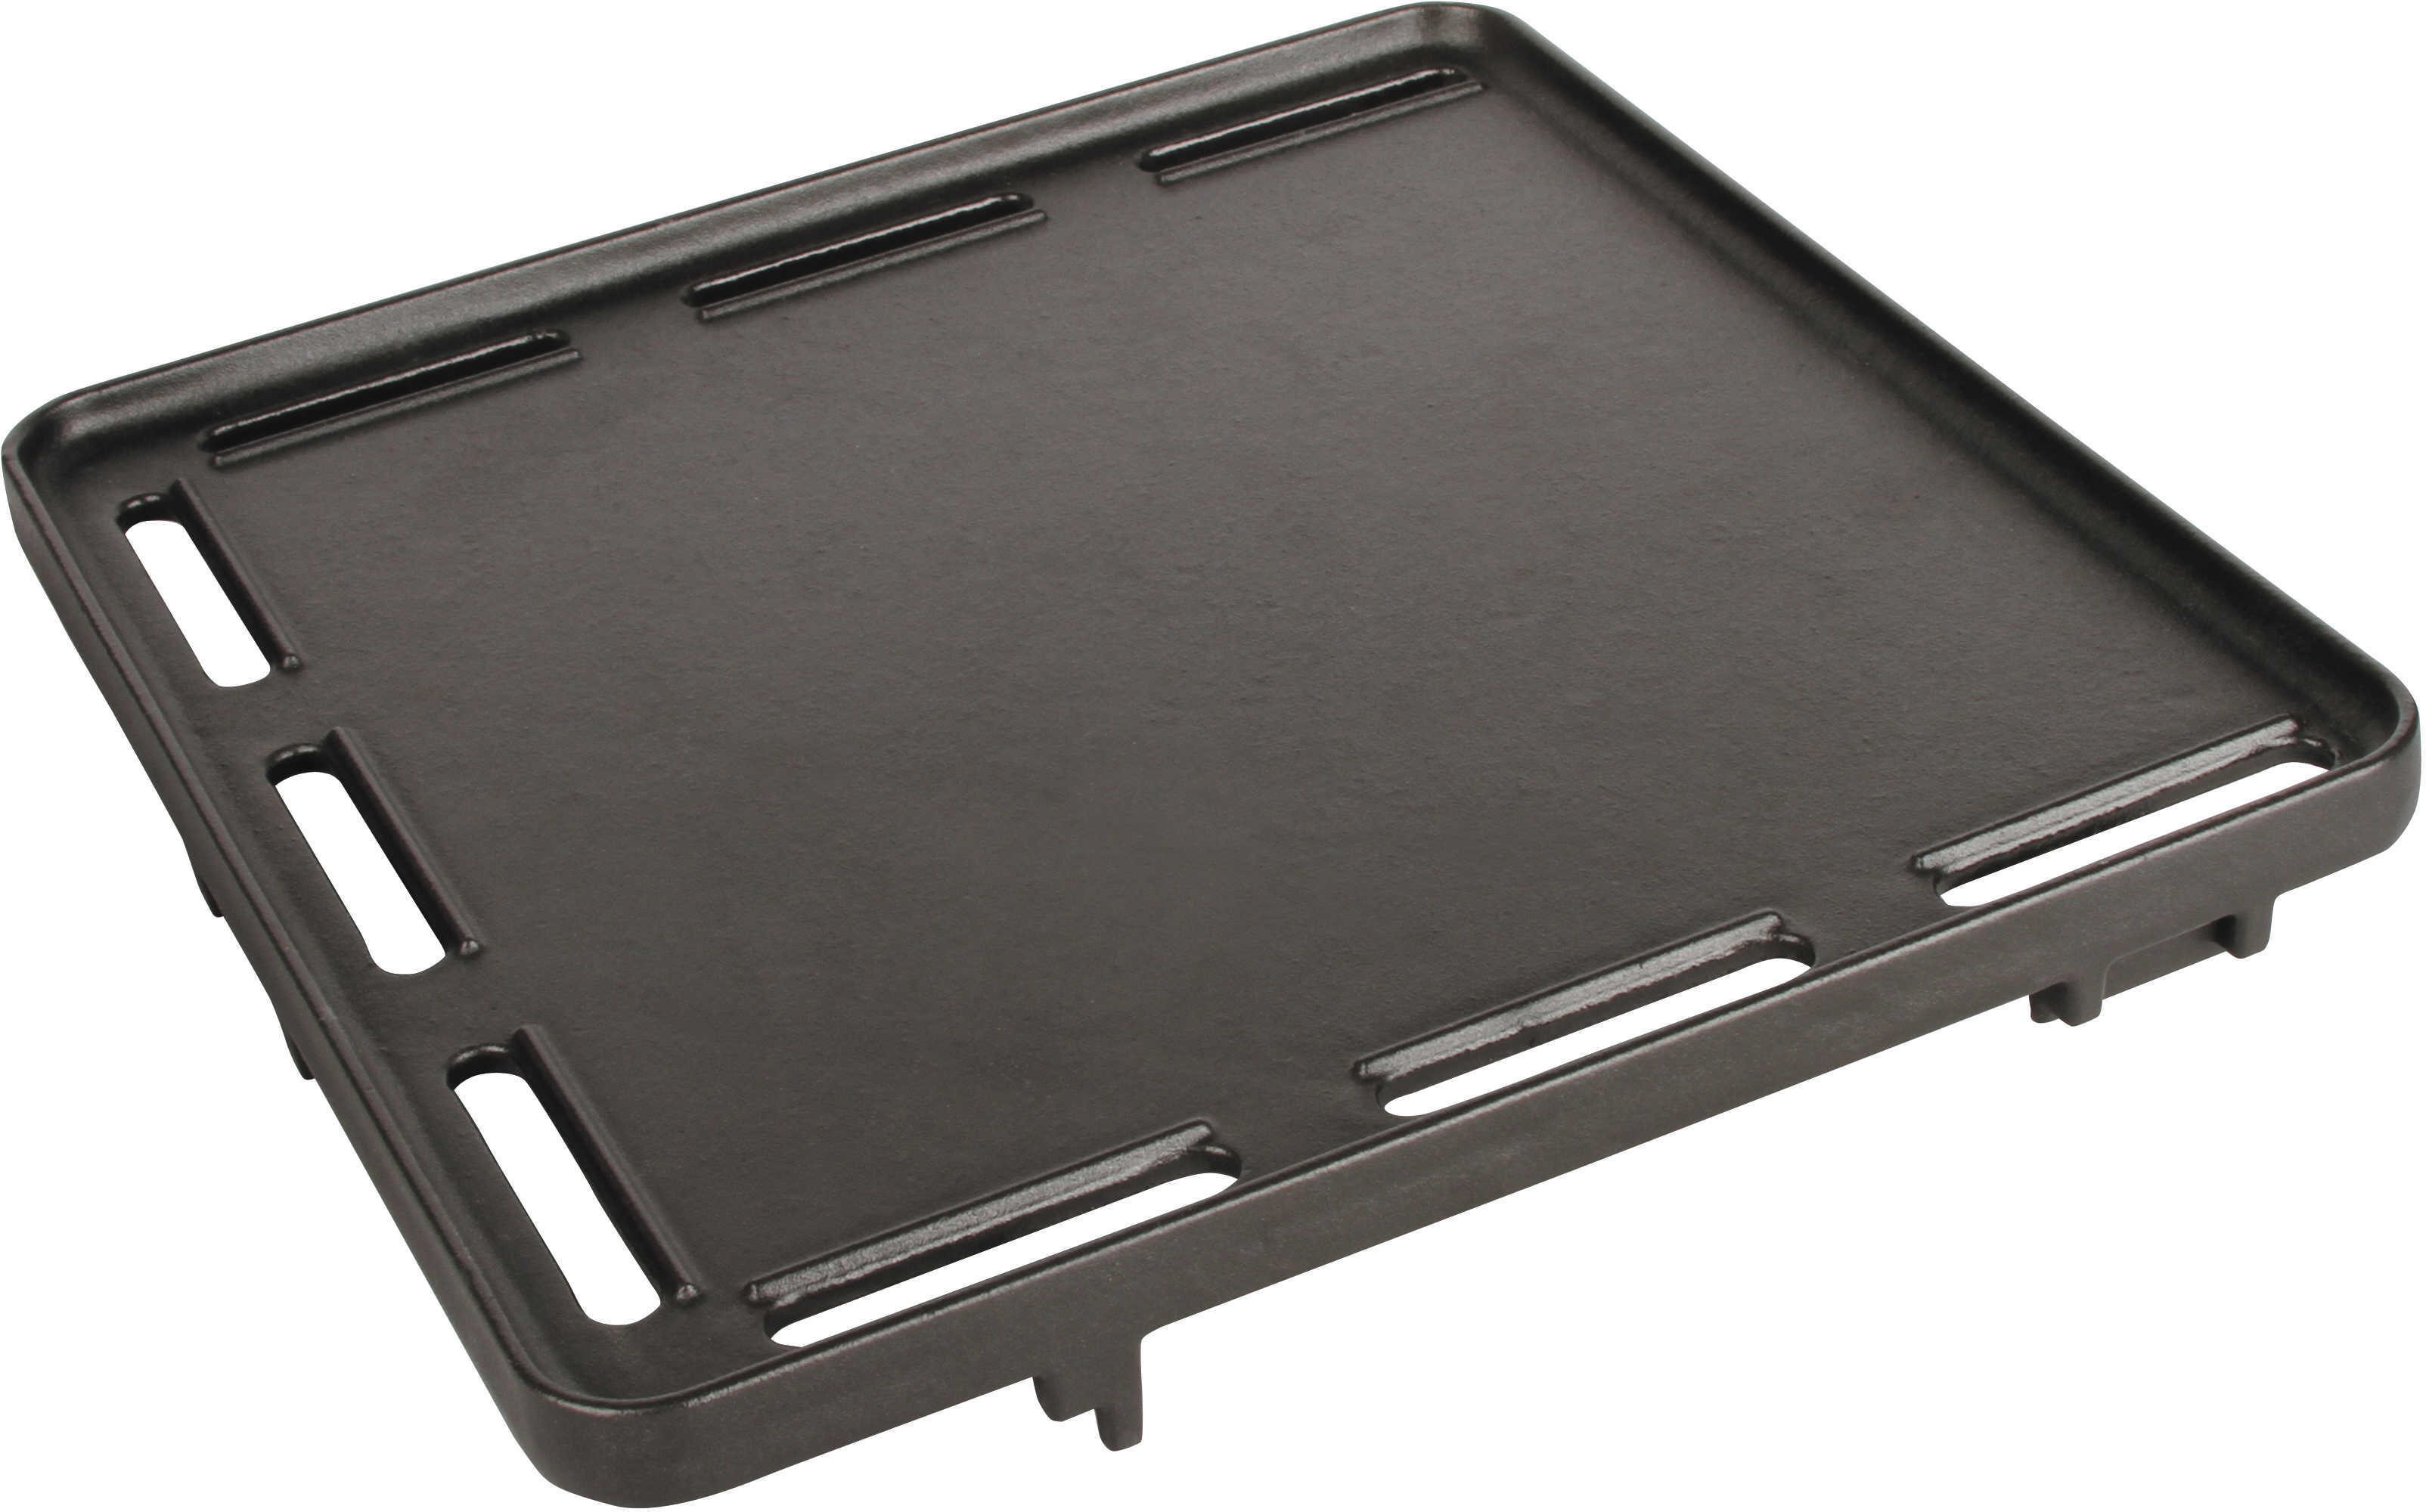 Coleman NXT Series Griddle Md: 2000012522